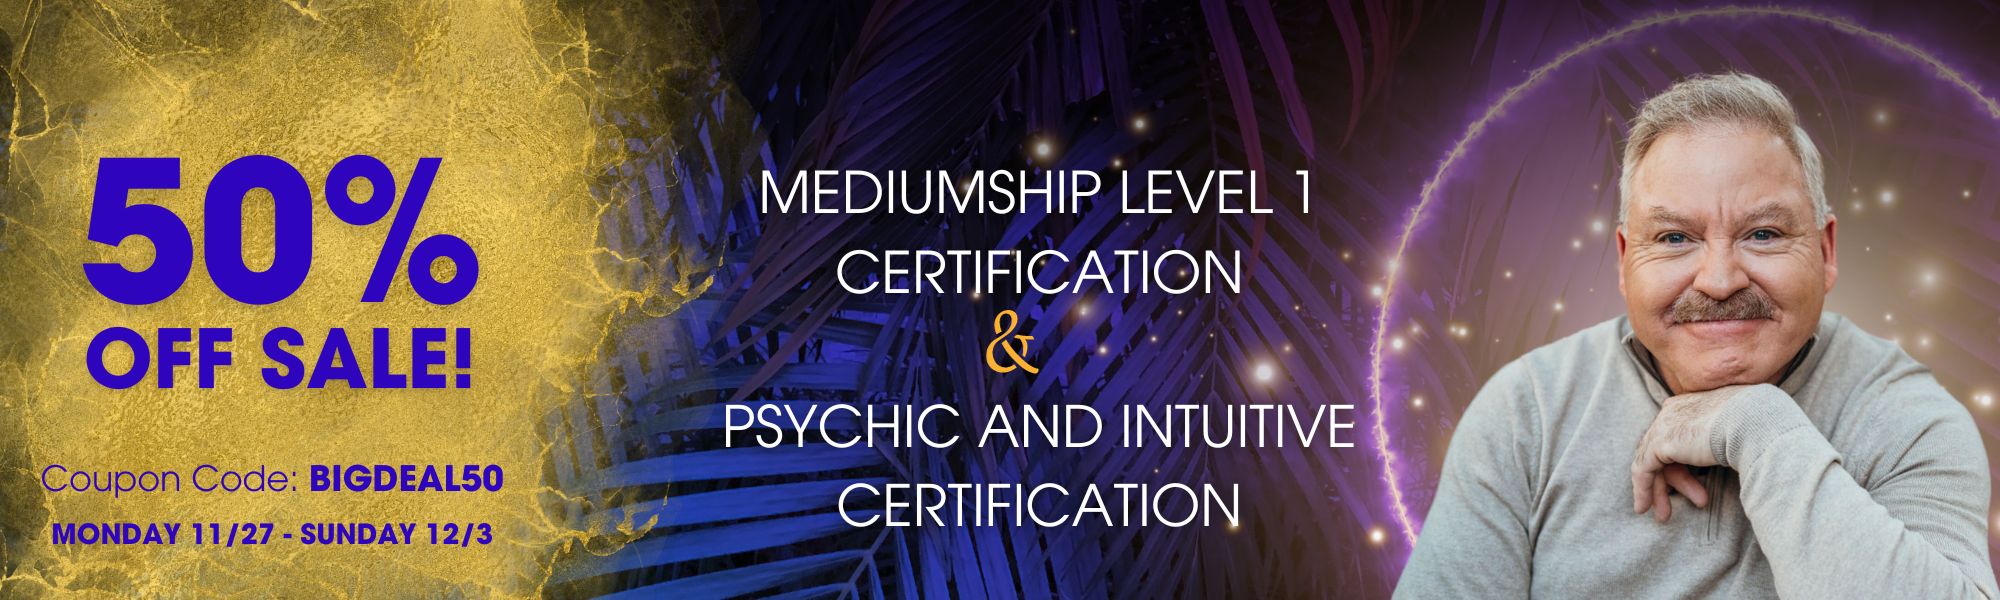 Get 50% Off Mediumship I and Psychic & Intuitive Certifications